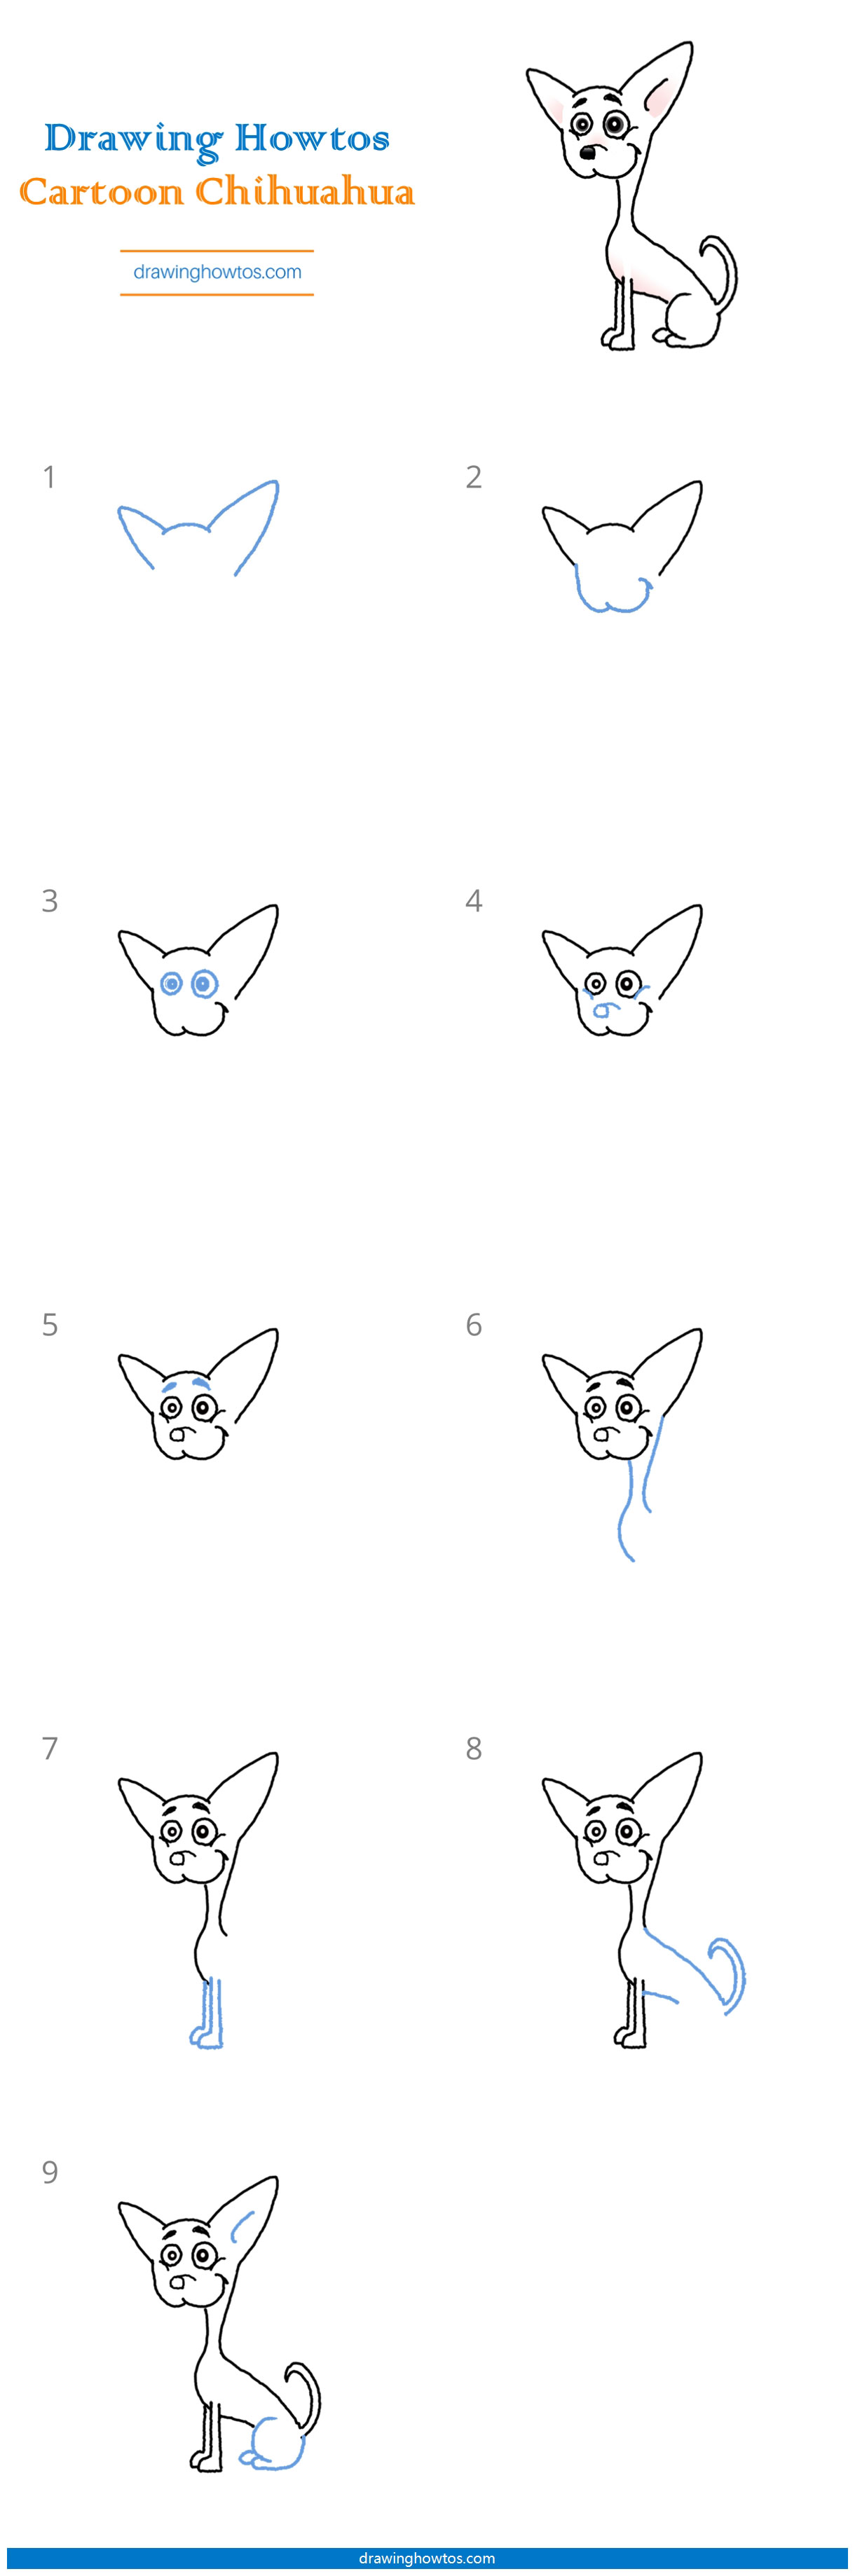 How to Draw a Chihuahua Step by Step